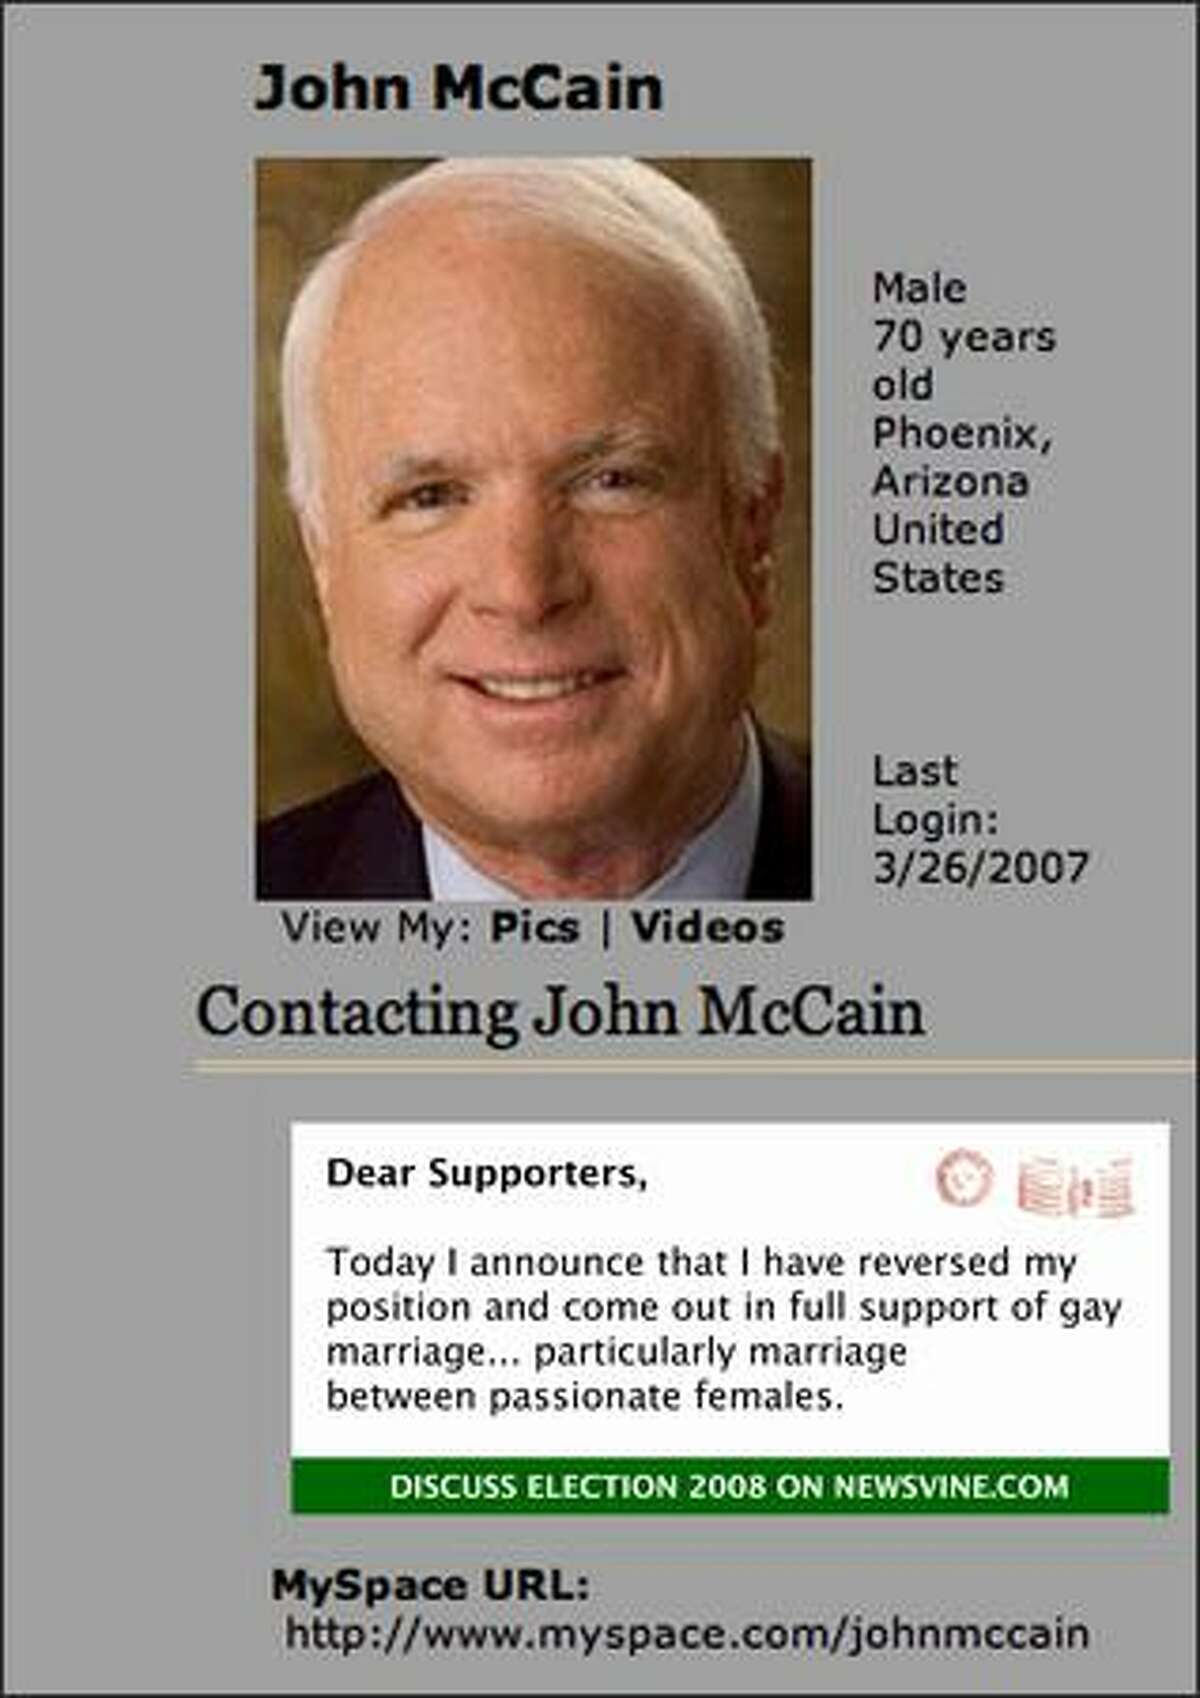 Newsvine.com CEO Mike Davidson didn't hack his way into Republican presidential candidate John McCain's MySpace page: He merely changed an image on his own site that McCain's site was using. The joke message in this image said Sen. McCain, R-Ariz., in a reversal of his previous position, was endorsing gay marriage -- "particularly marriage between passionate females." (Photo courtesy of Newsvine.com)